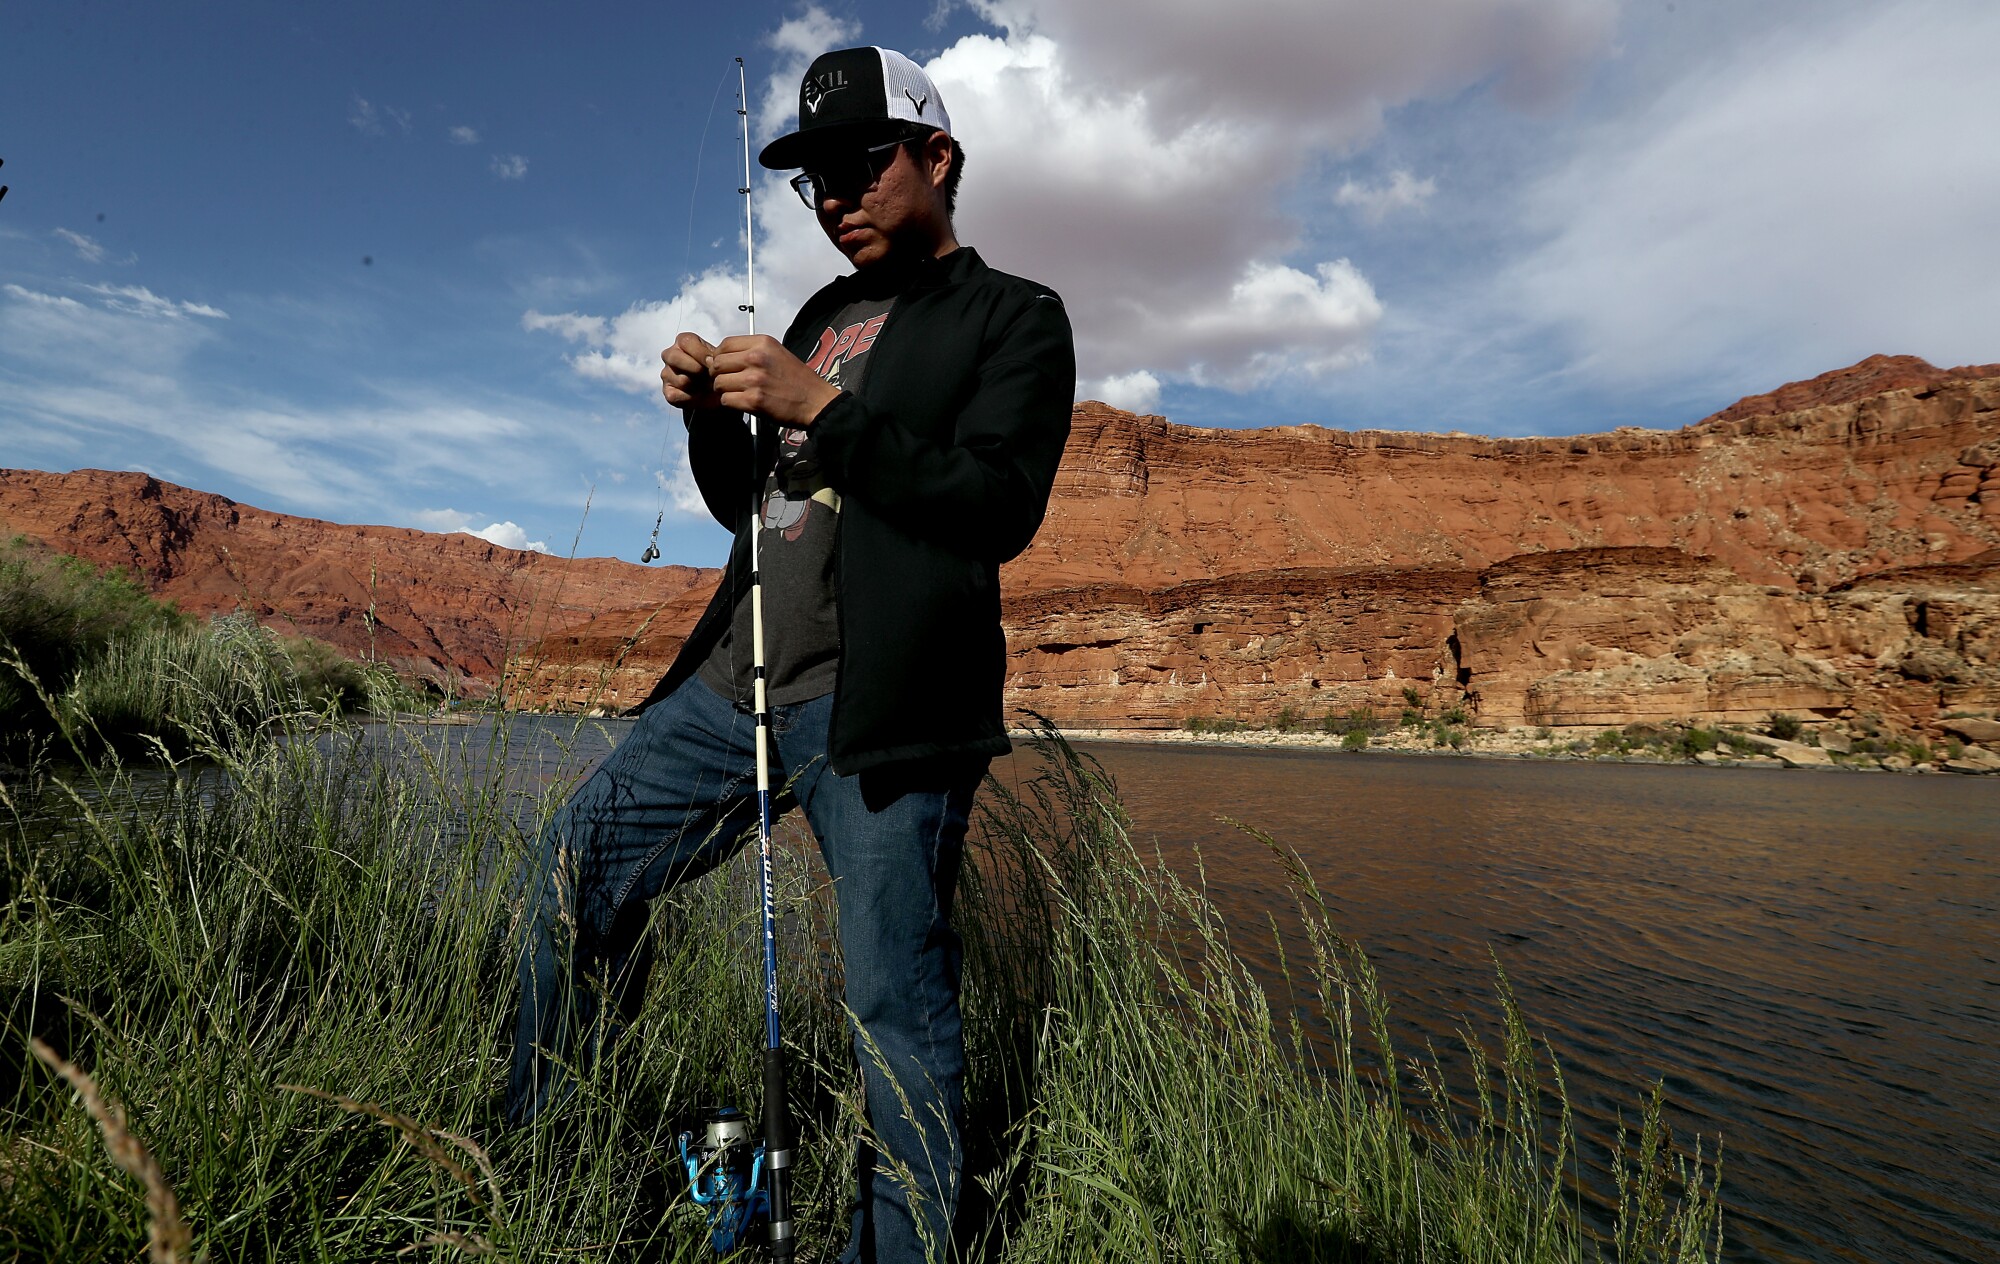 A fisherman settles on the banks of the Colorado River